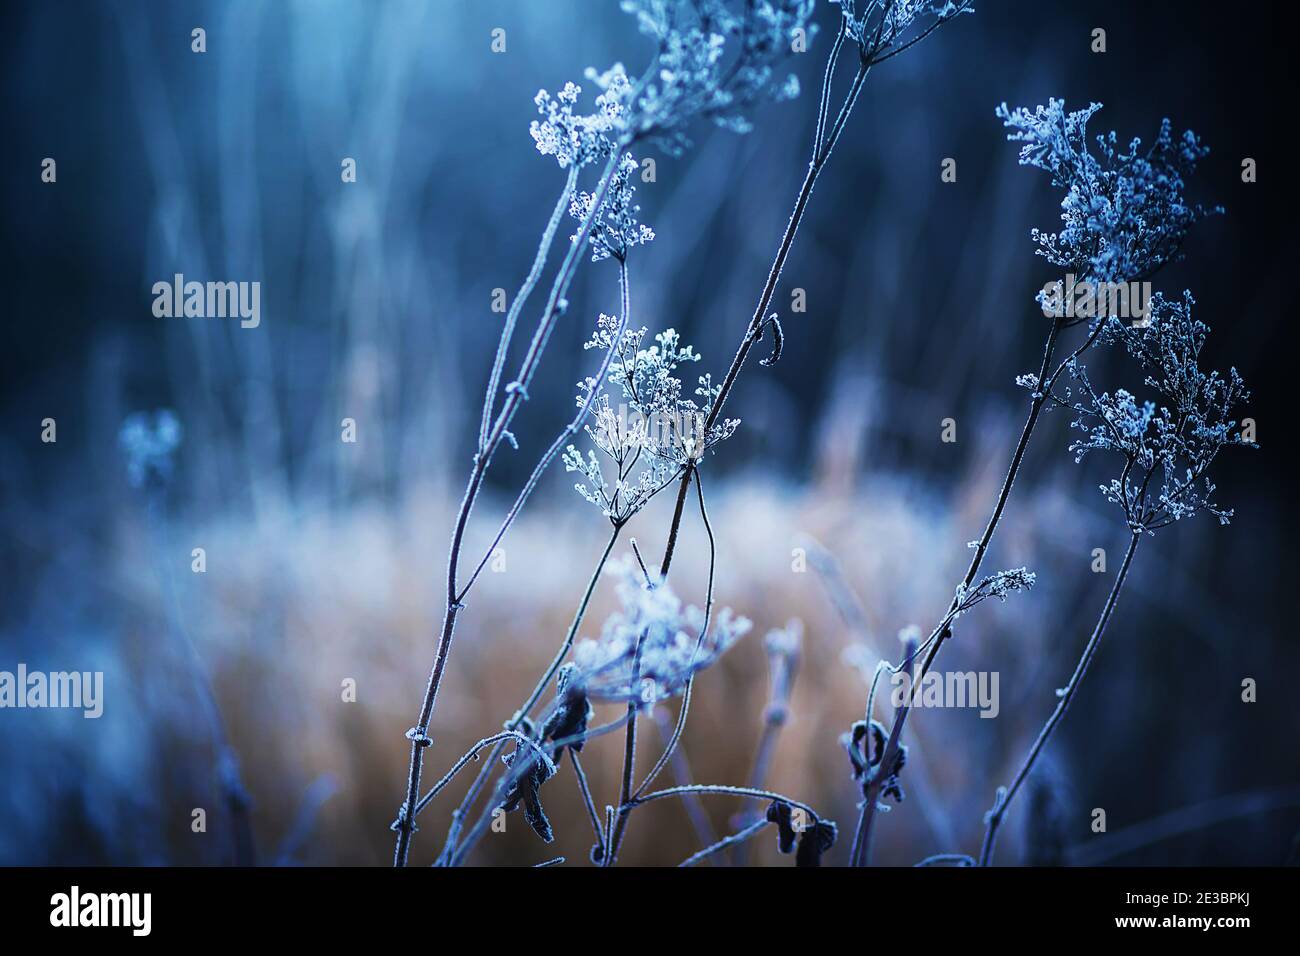 A withered plant on thin stems is covered with frost and snow in a cold frosty winter in a dark forest. Nature in winter. Stock Photo